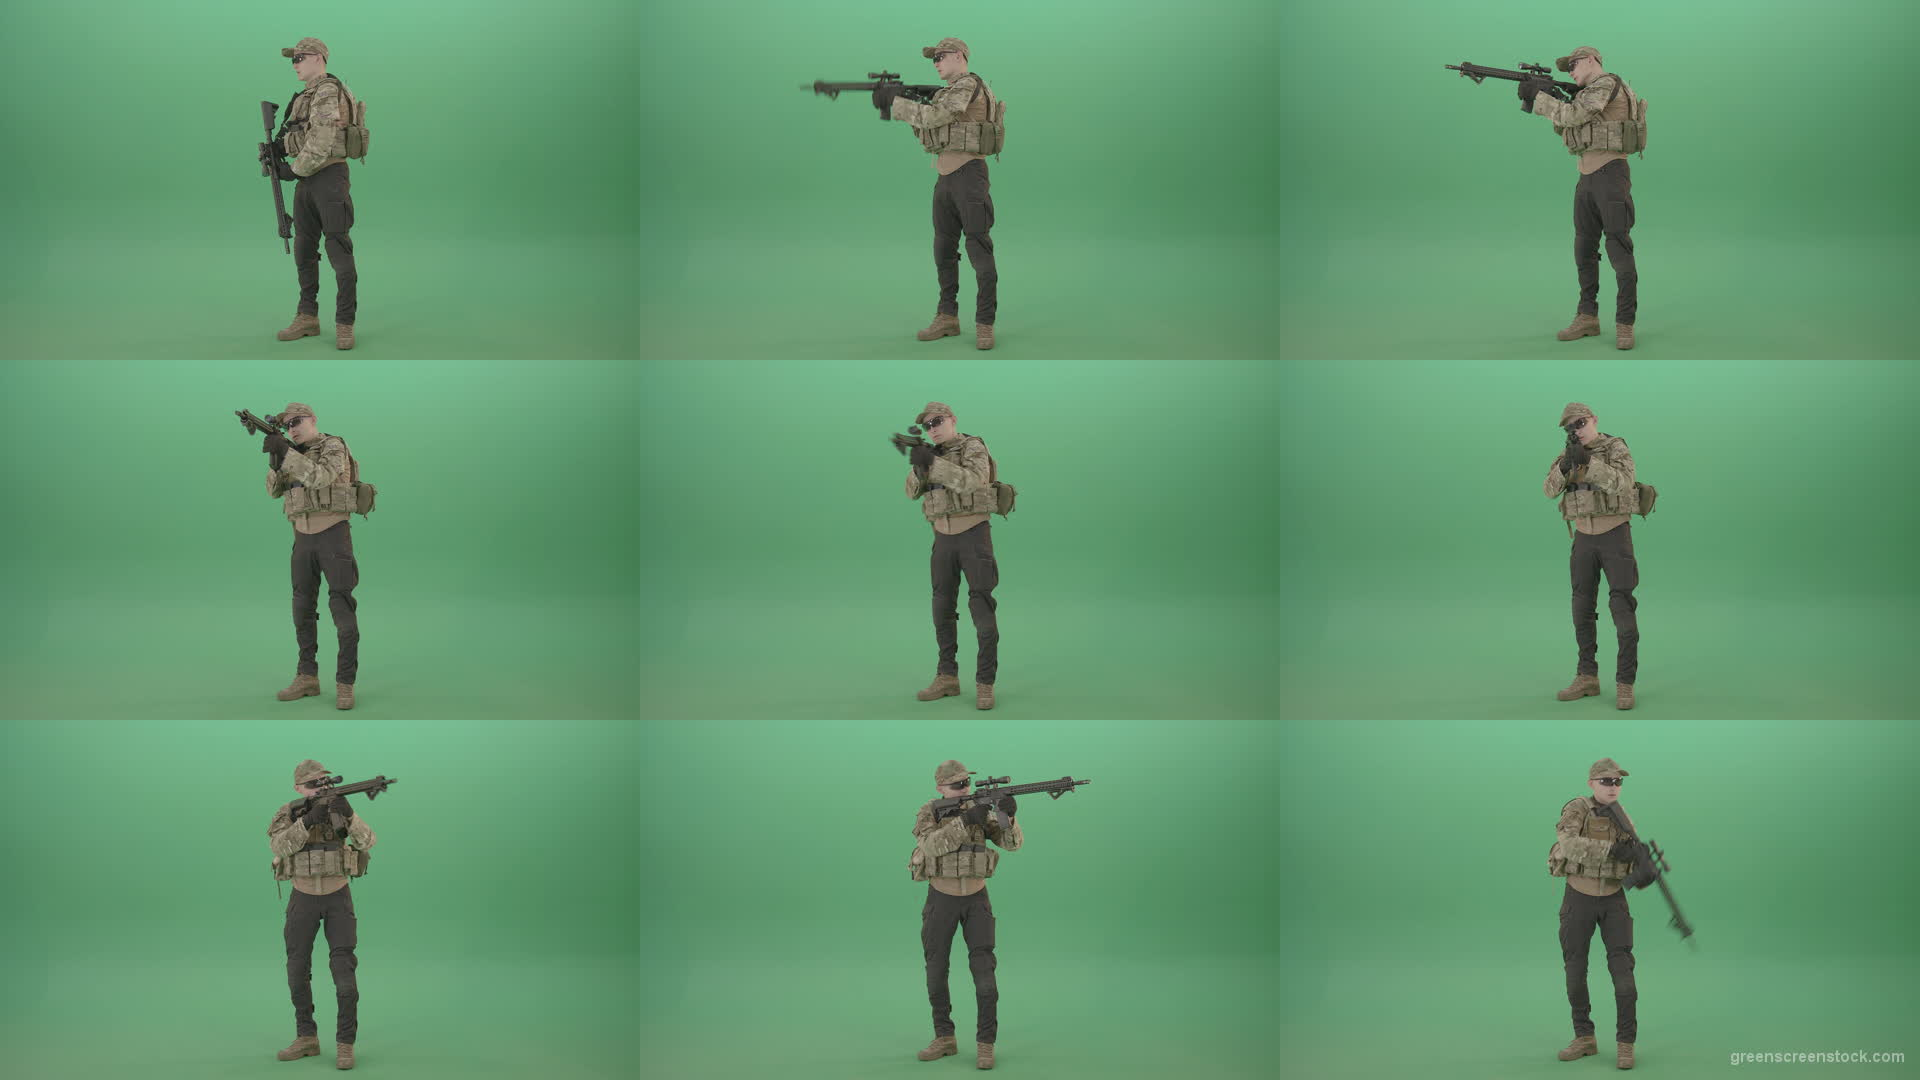 Counter-strike-army-police-man-shooting-enemy-from-machine-gun-in-Camouflage-uniform-on-green-screen-4K-Video-Footage-1920 Green Screen Stock